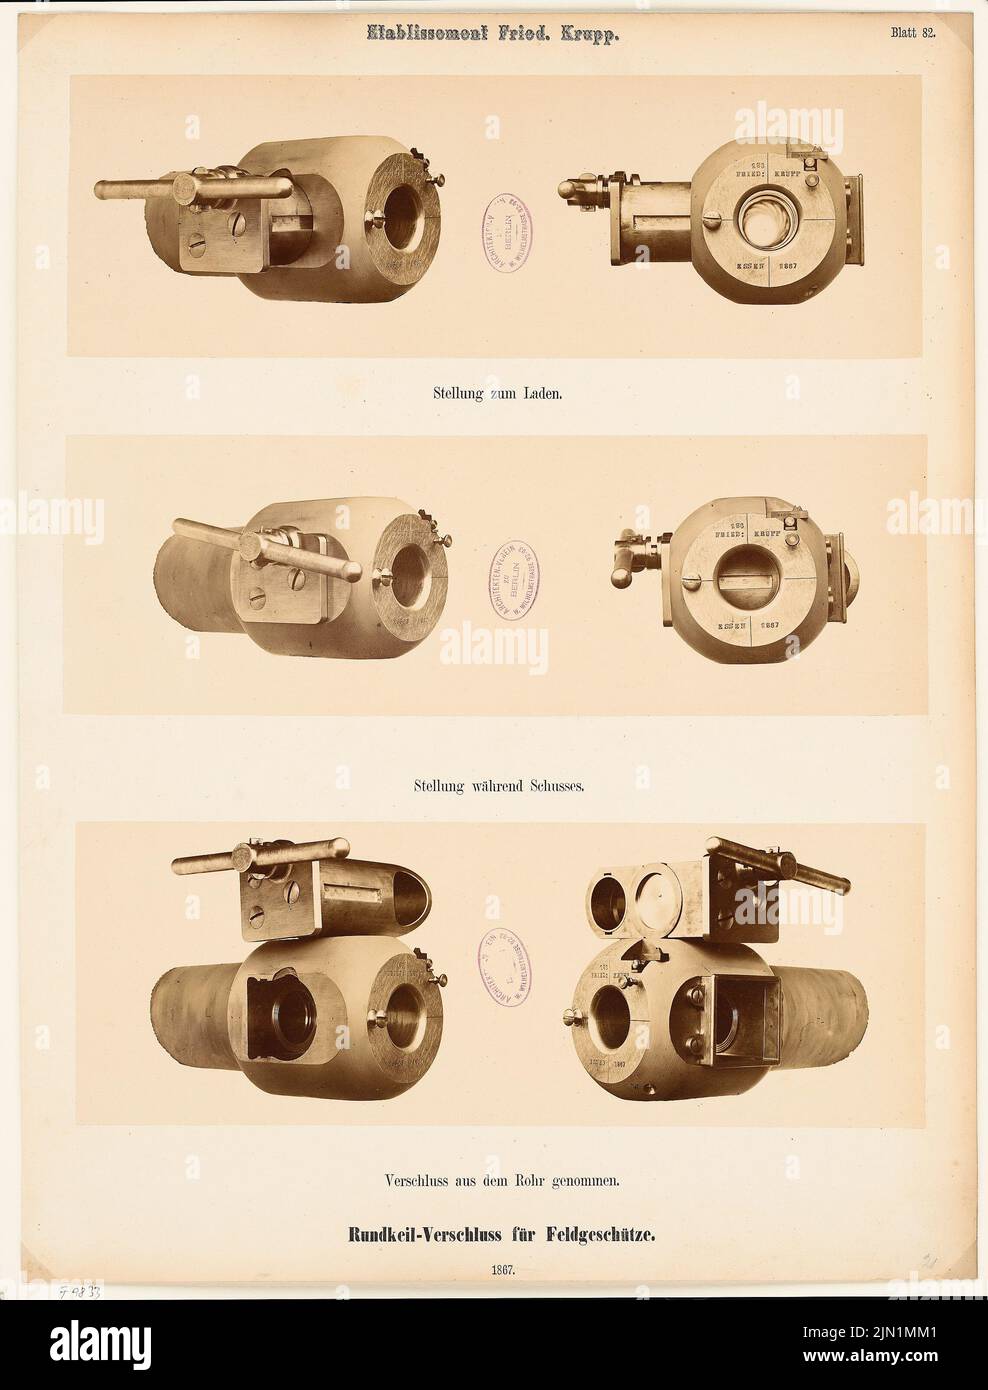 N.N., Gussstahlfabrik Friedrich Krupp, Essen (1867): View of the round wedge closure for field guns: Position for charging while shot, closure taken out of the pipe. Photo on cardboard, 62 x 47.2 cm (including scan edges) N.N. : Gussstahlfabrik Friedrich Krupp, Essen Stock Photo